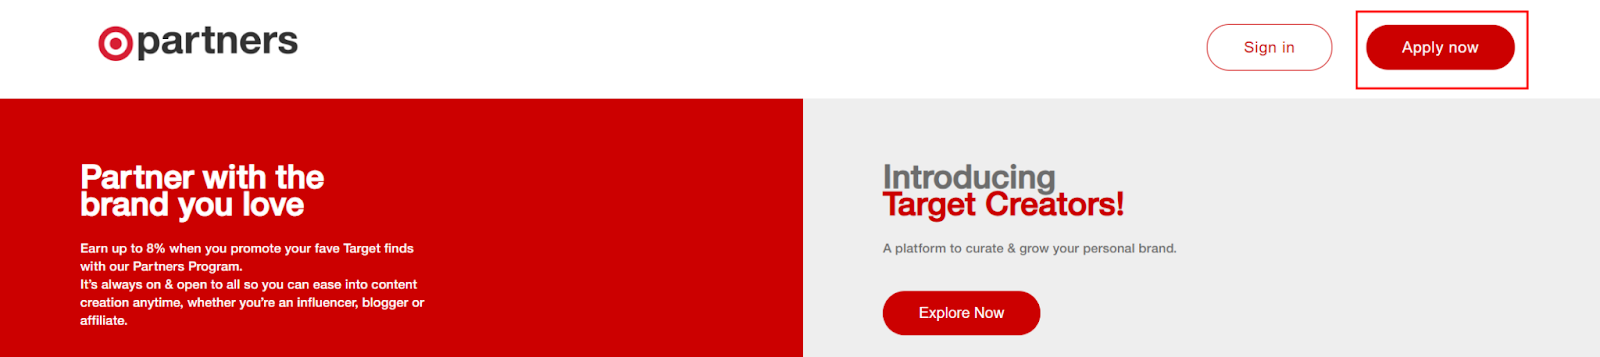 Target publisher home page